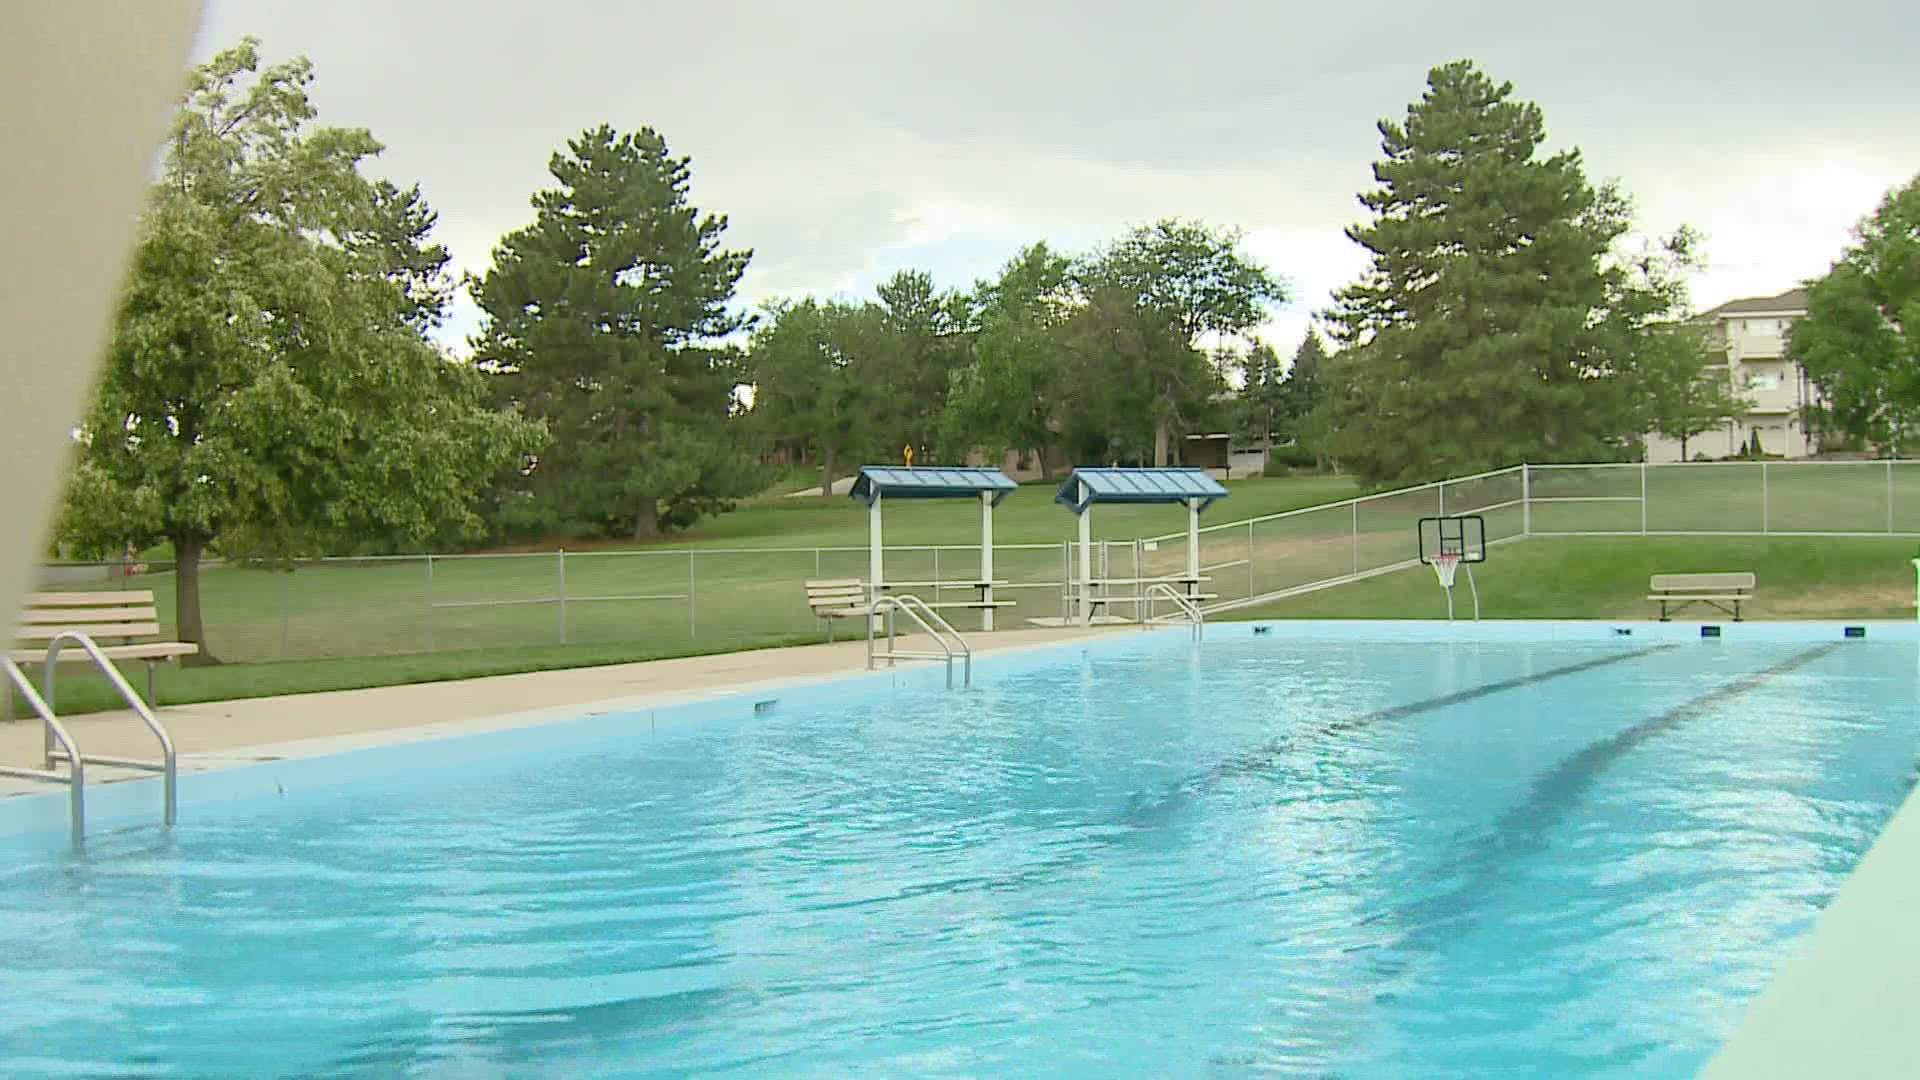 A statewide survey found pools were running at only about 56 percent of normal operations this summer. The "Pools Special Initiative 2022" offers up to $25k.